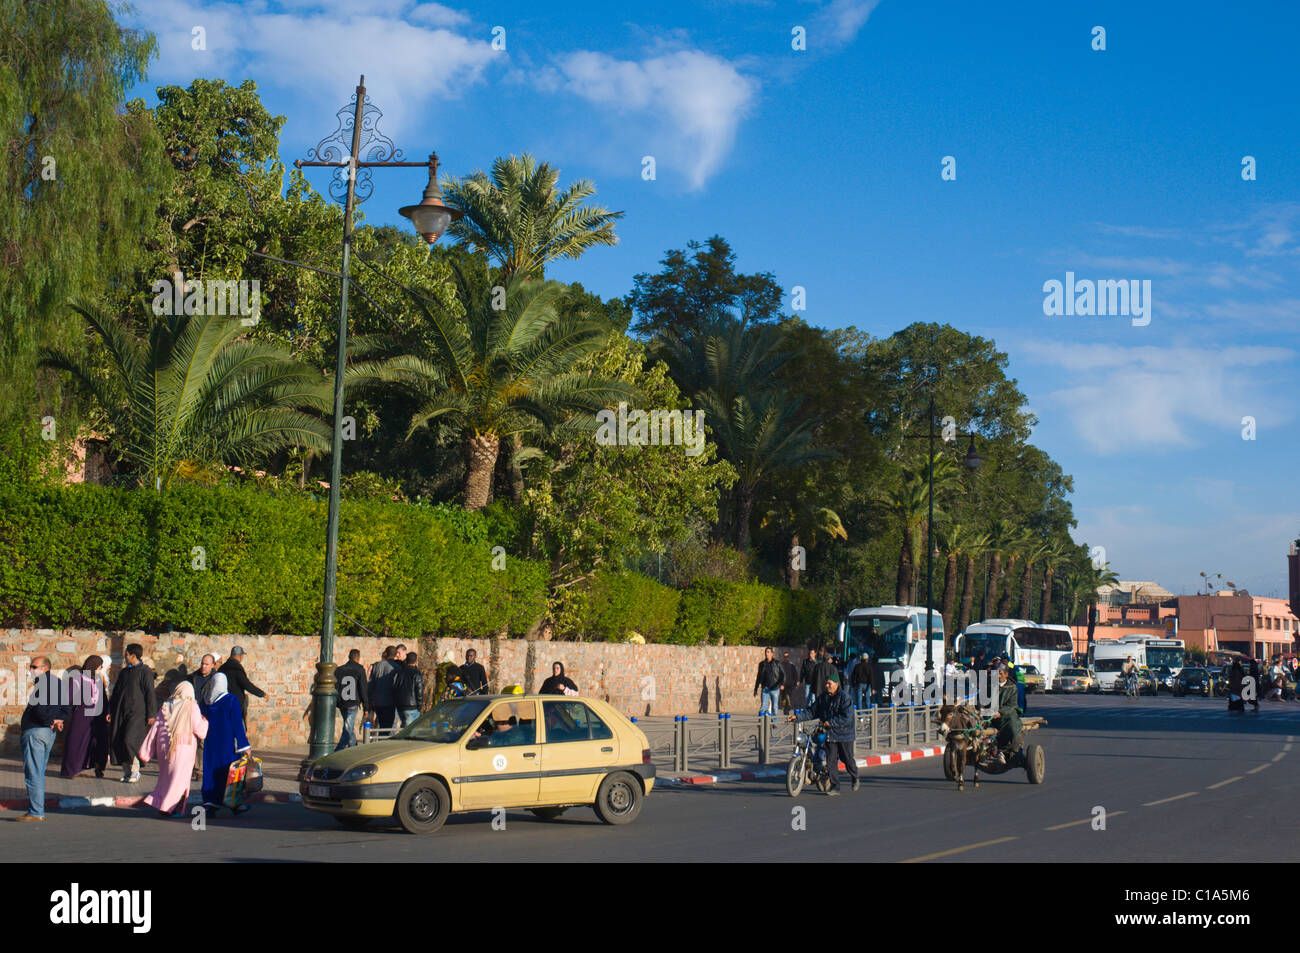 Traffic at Place de Foucauld square Marrakesh central Morocco Africa Stock Photo